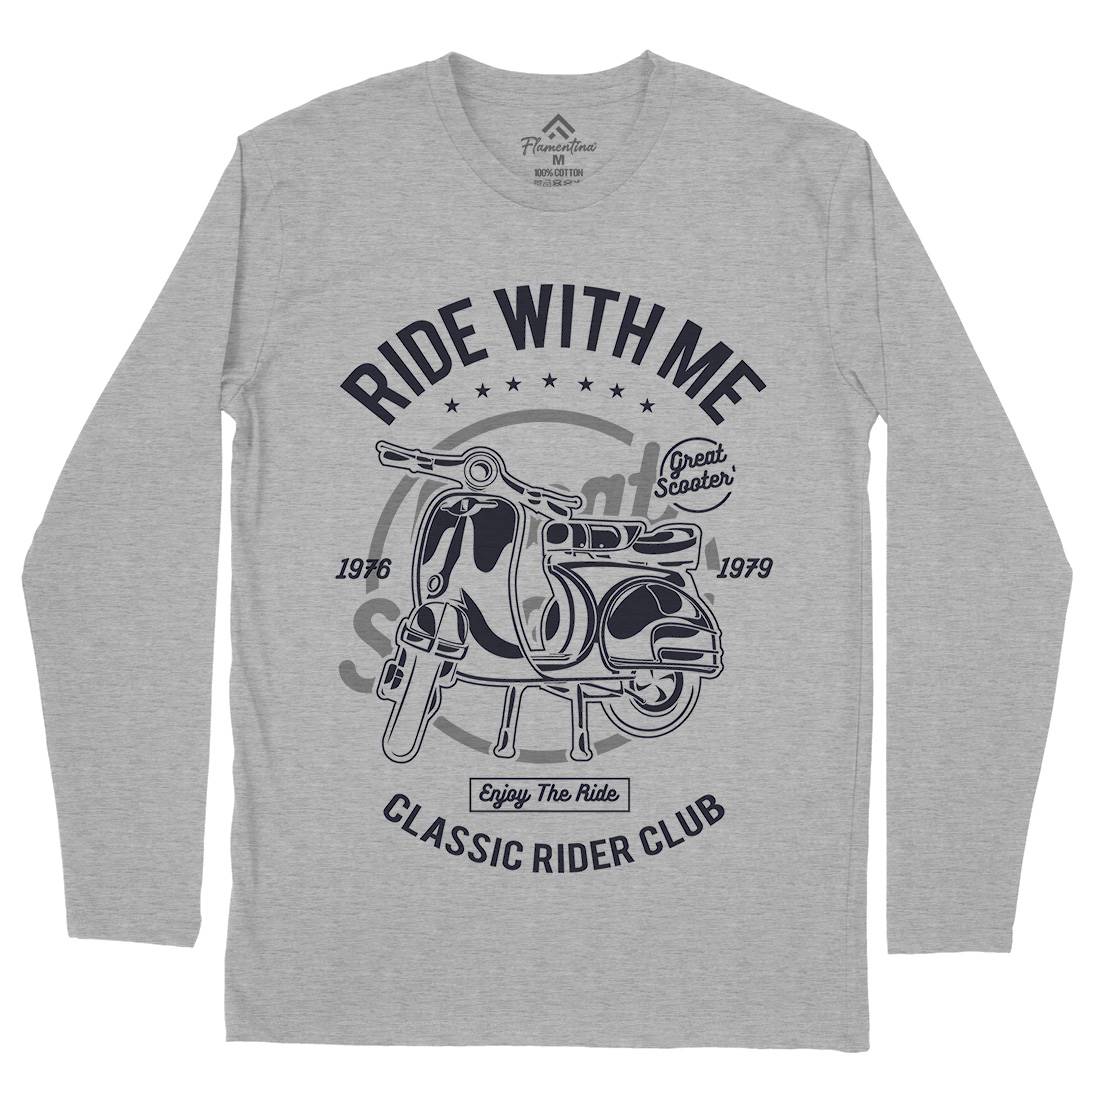 Ride With Me Mens Long Sleeve T-Shirt Motorcycles A120